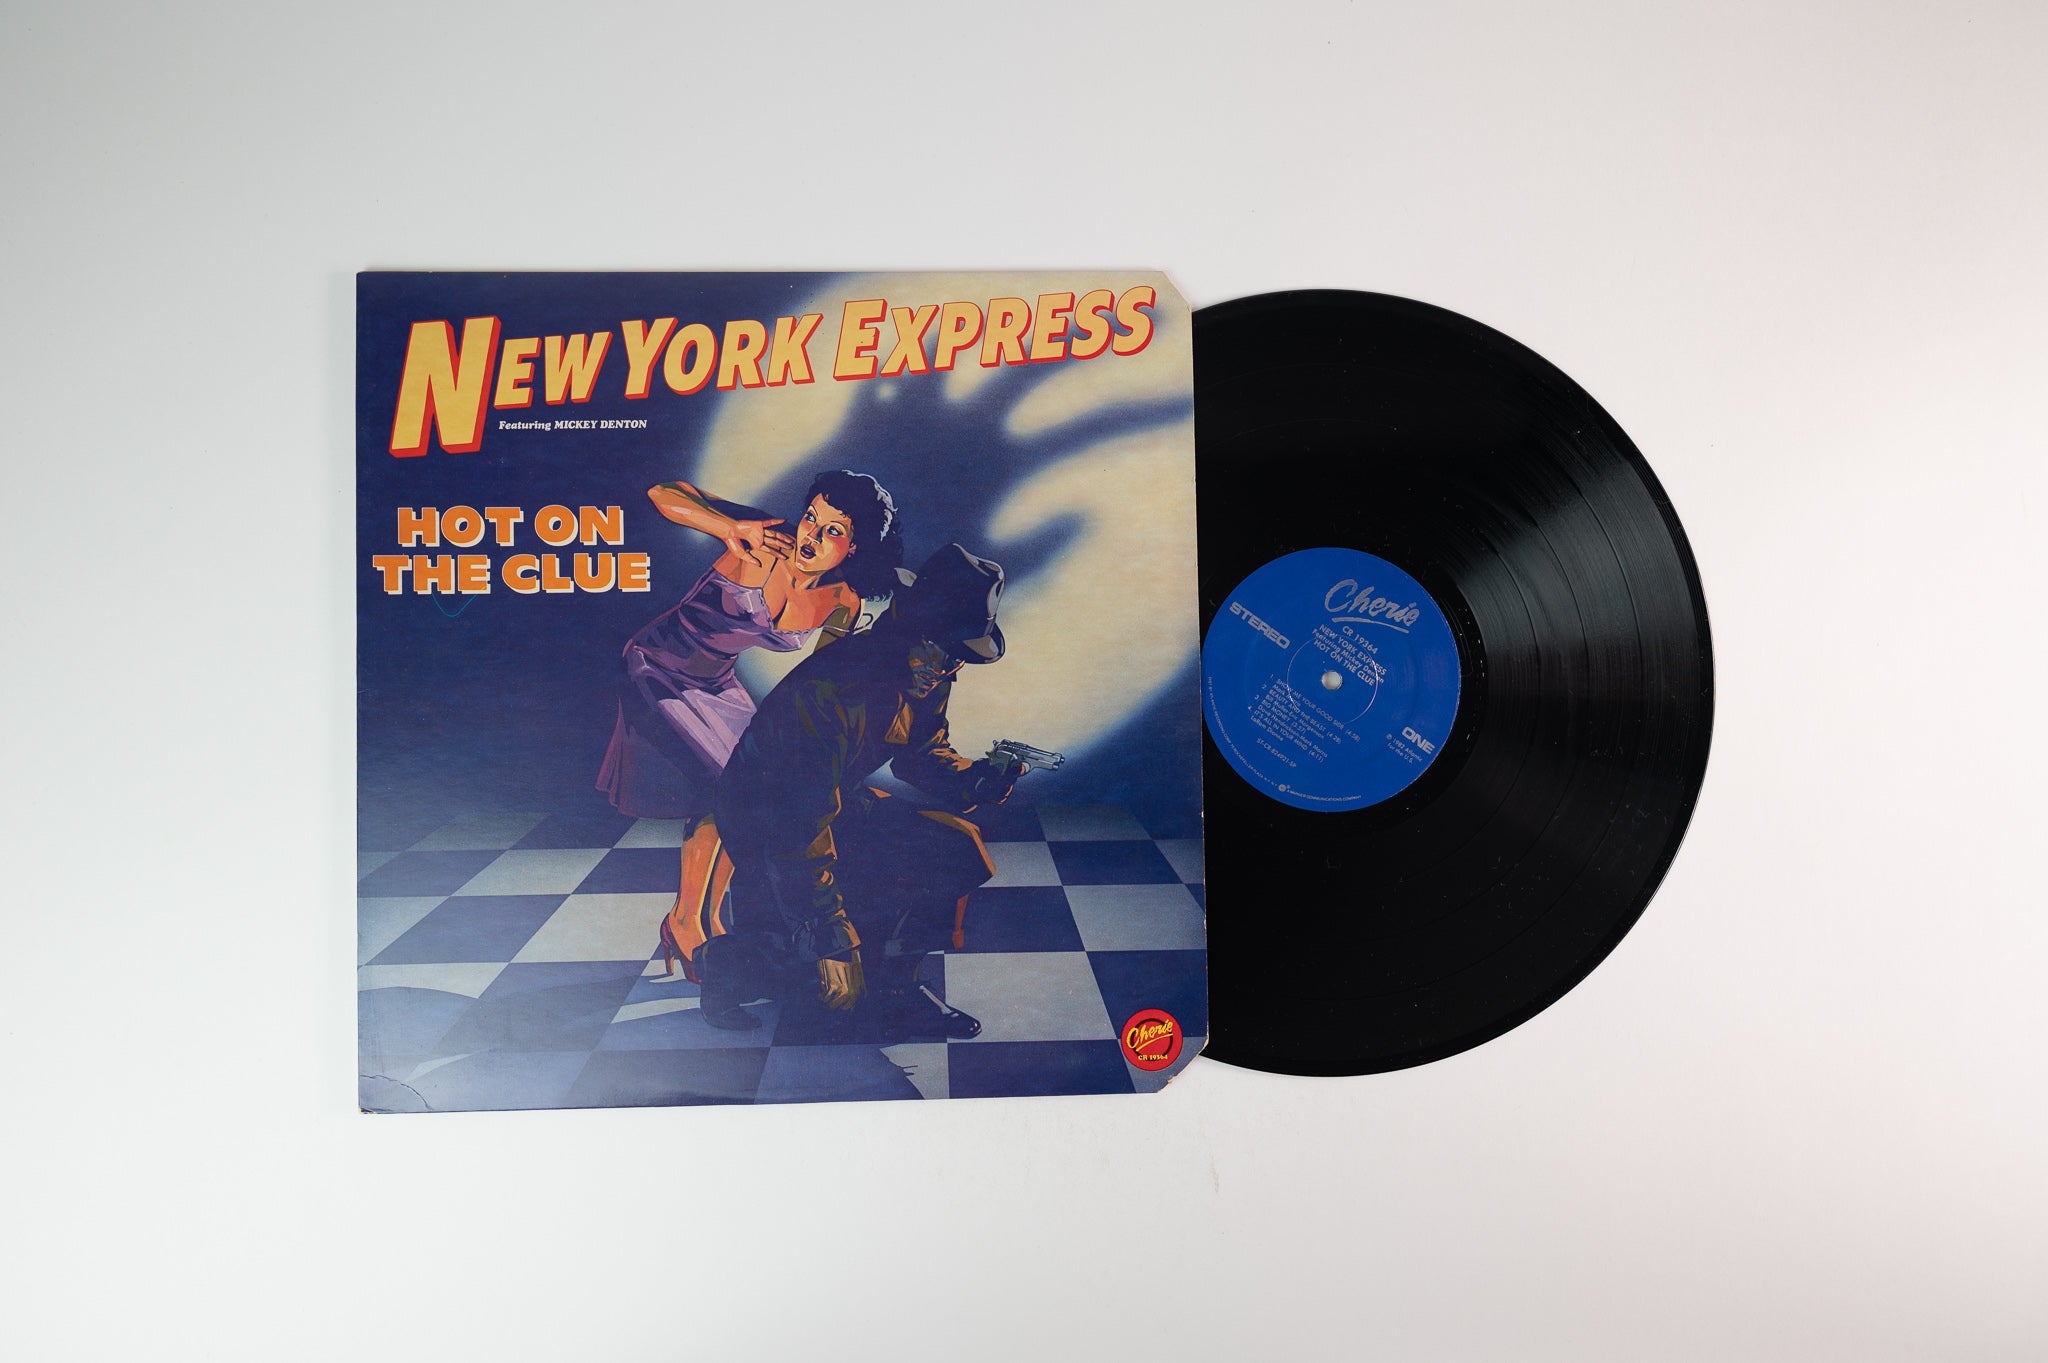 New York Express - Hot On The Clue on Cherie